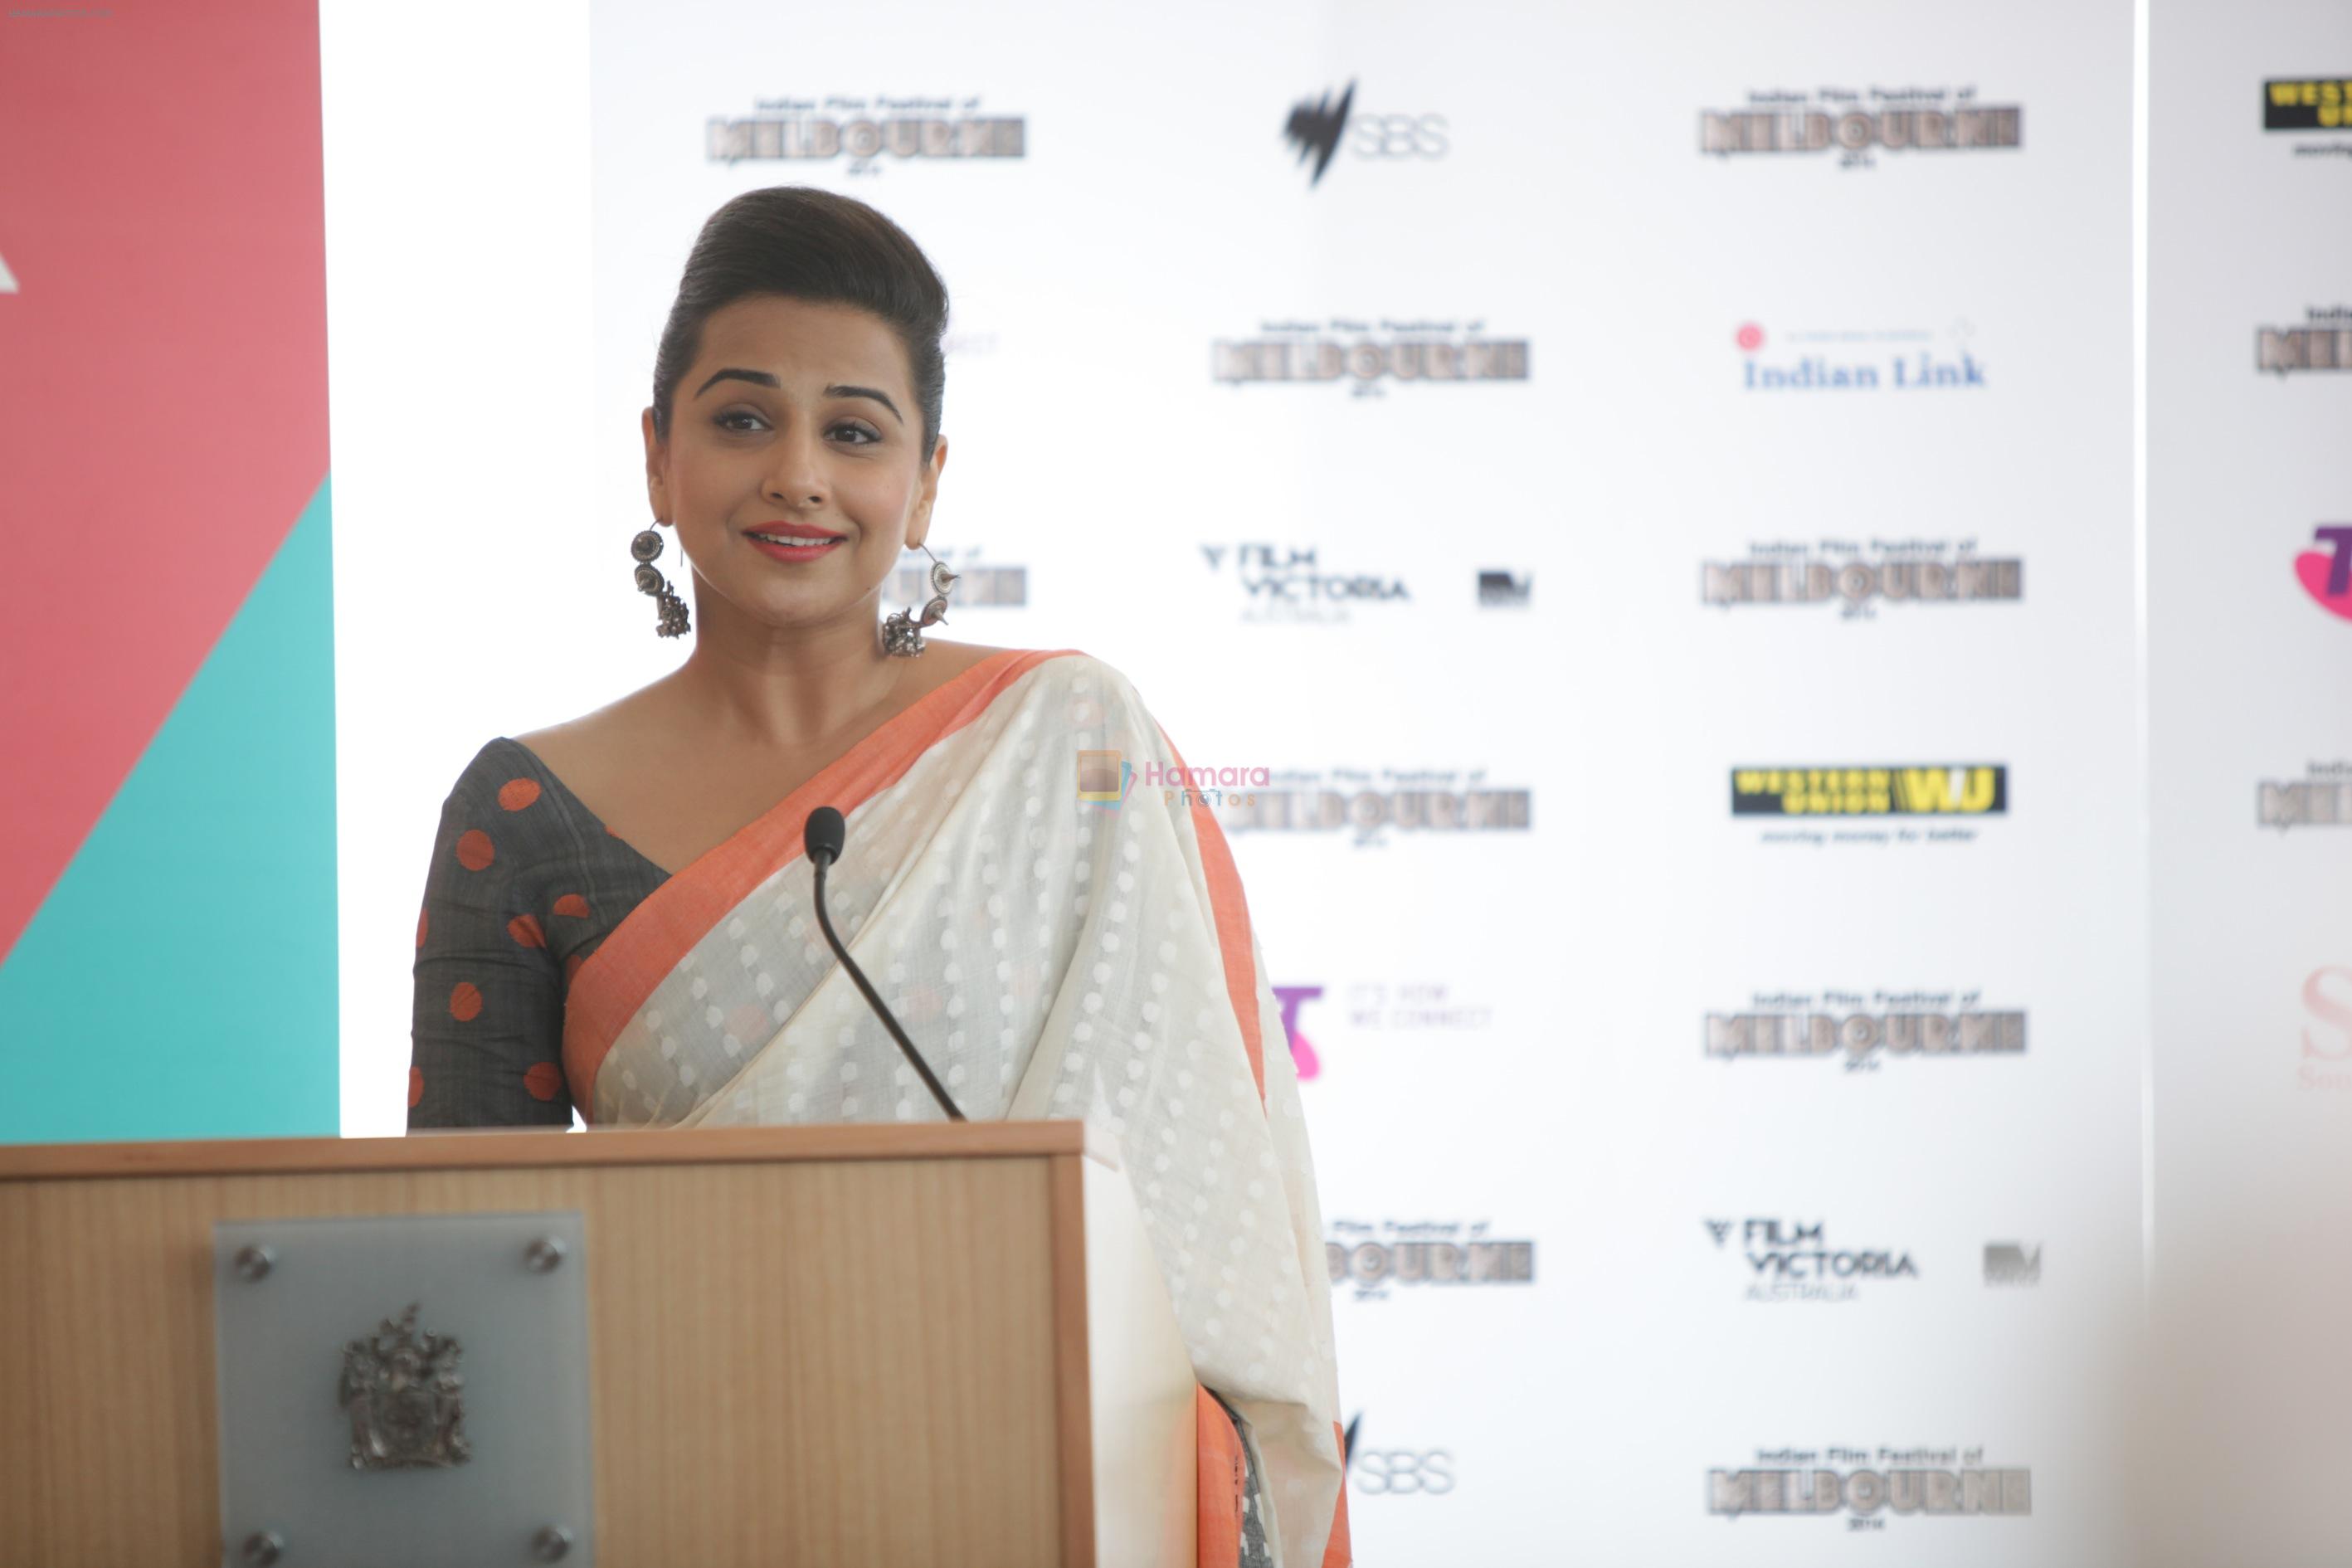 Vidya Balan at The program for the 2014 edition of the Indian Film Festival of Melbourne (IFFM) was launched in Melbourne on 28th March 2014